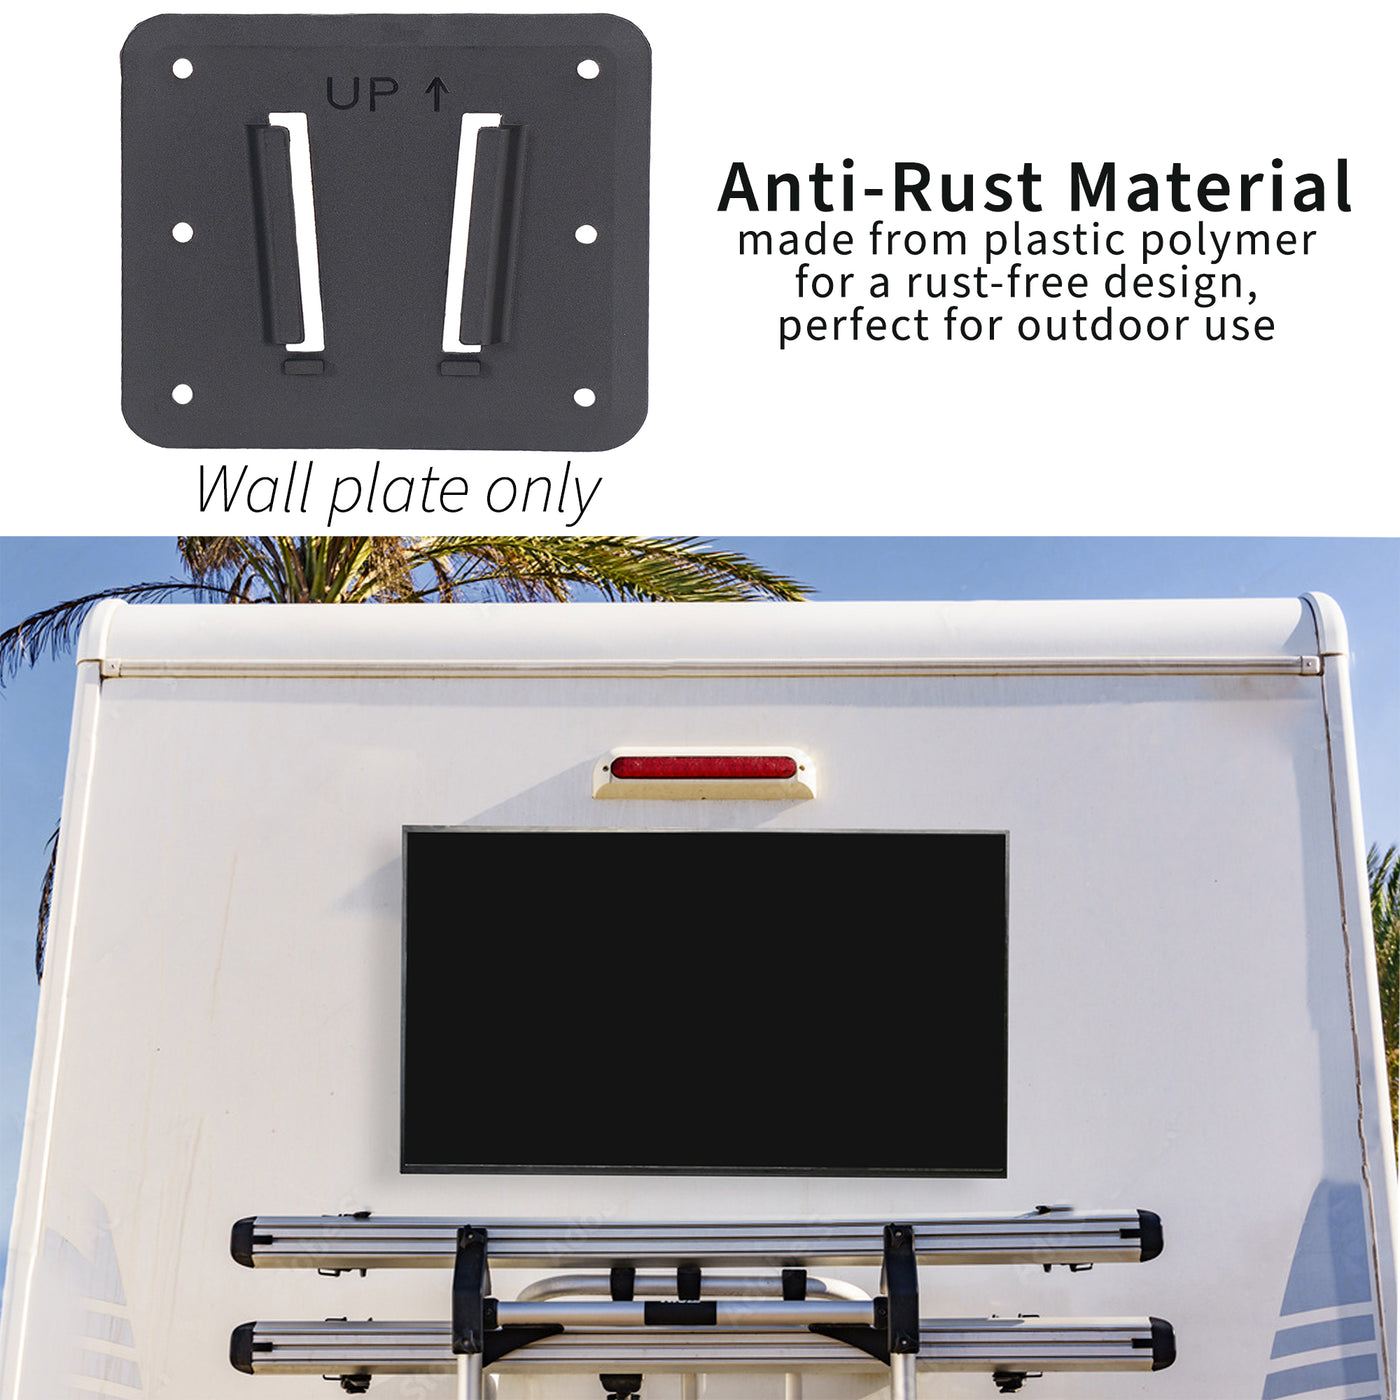 Anti-rust RV VESA TV mount for large screens featuring easy installation and removal and all necessary hardware included. Suitable for indoor or outdoor mounting.